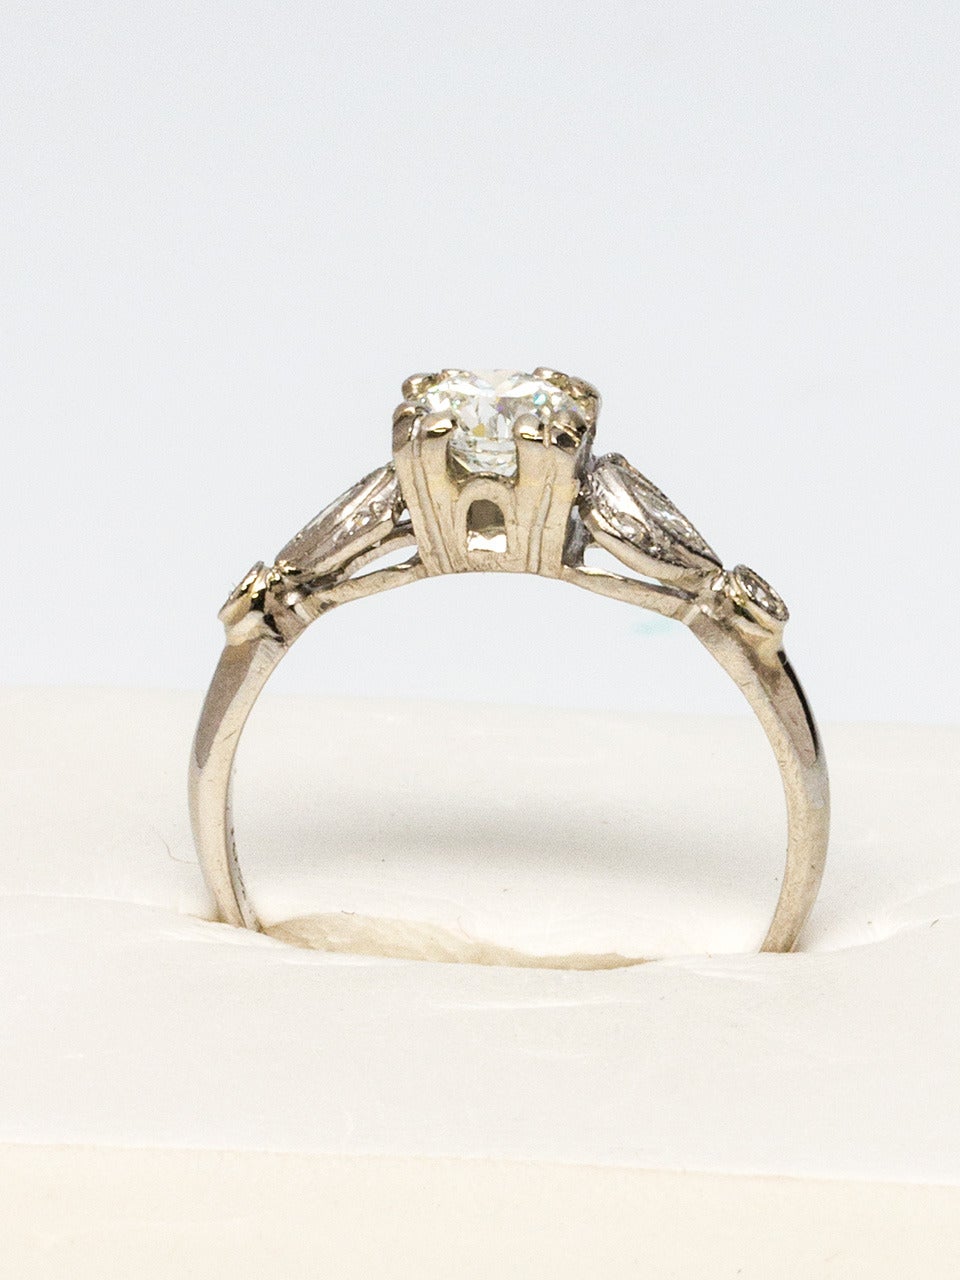 Diamond Engagement Ring 0.51 Carat Transitional Cut Round Brilliant, 1940s In Excellent Condition For Sale In West Hollywood, CA